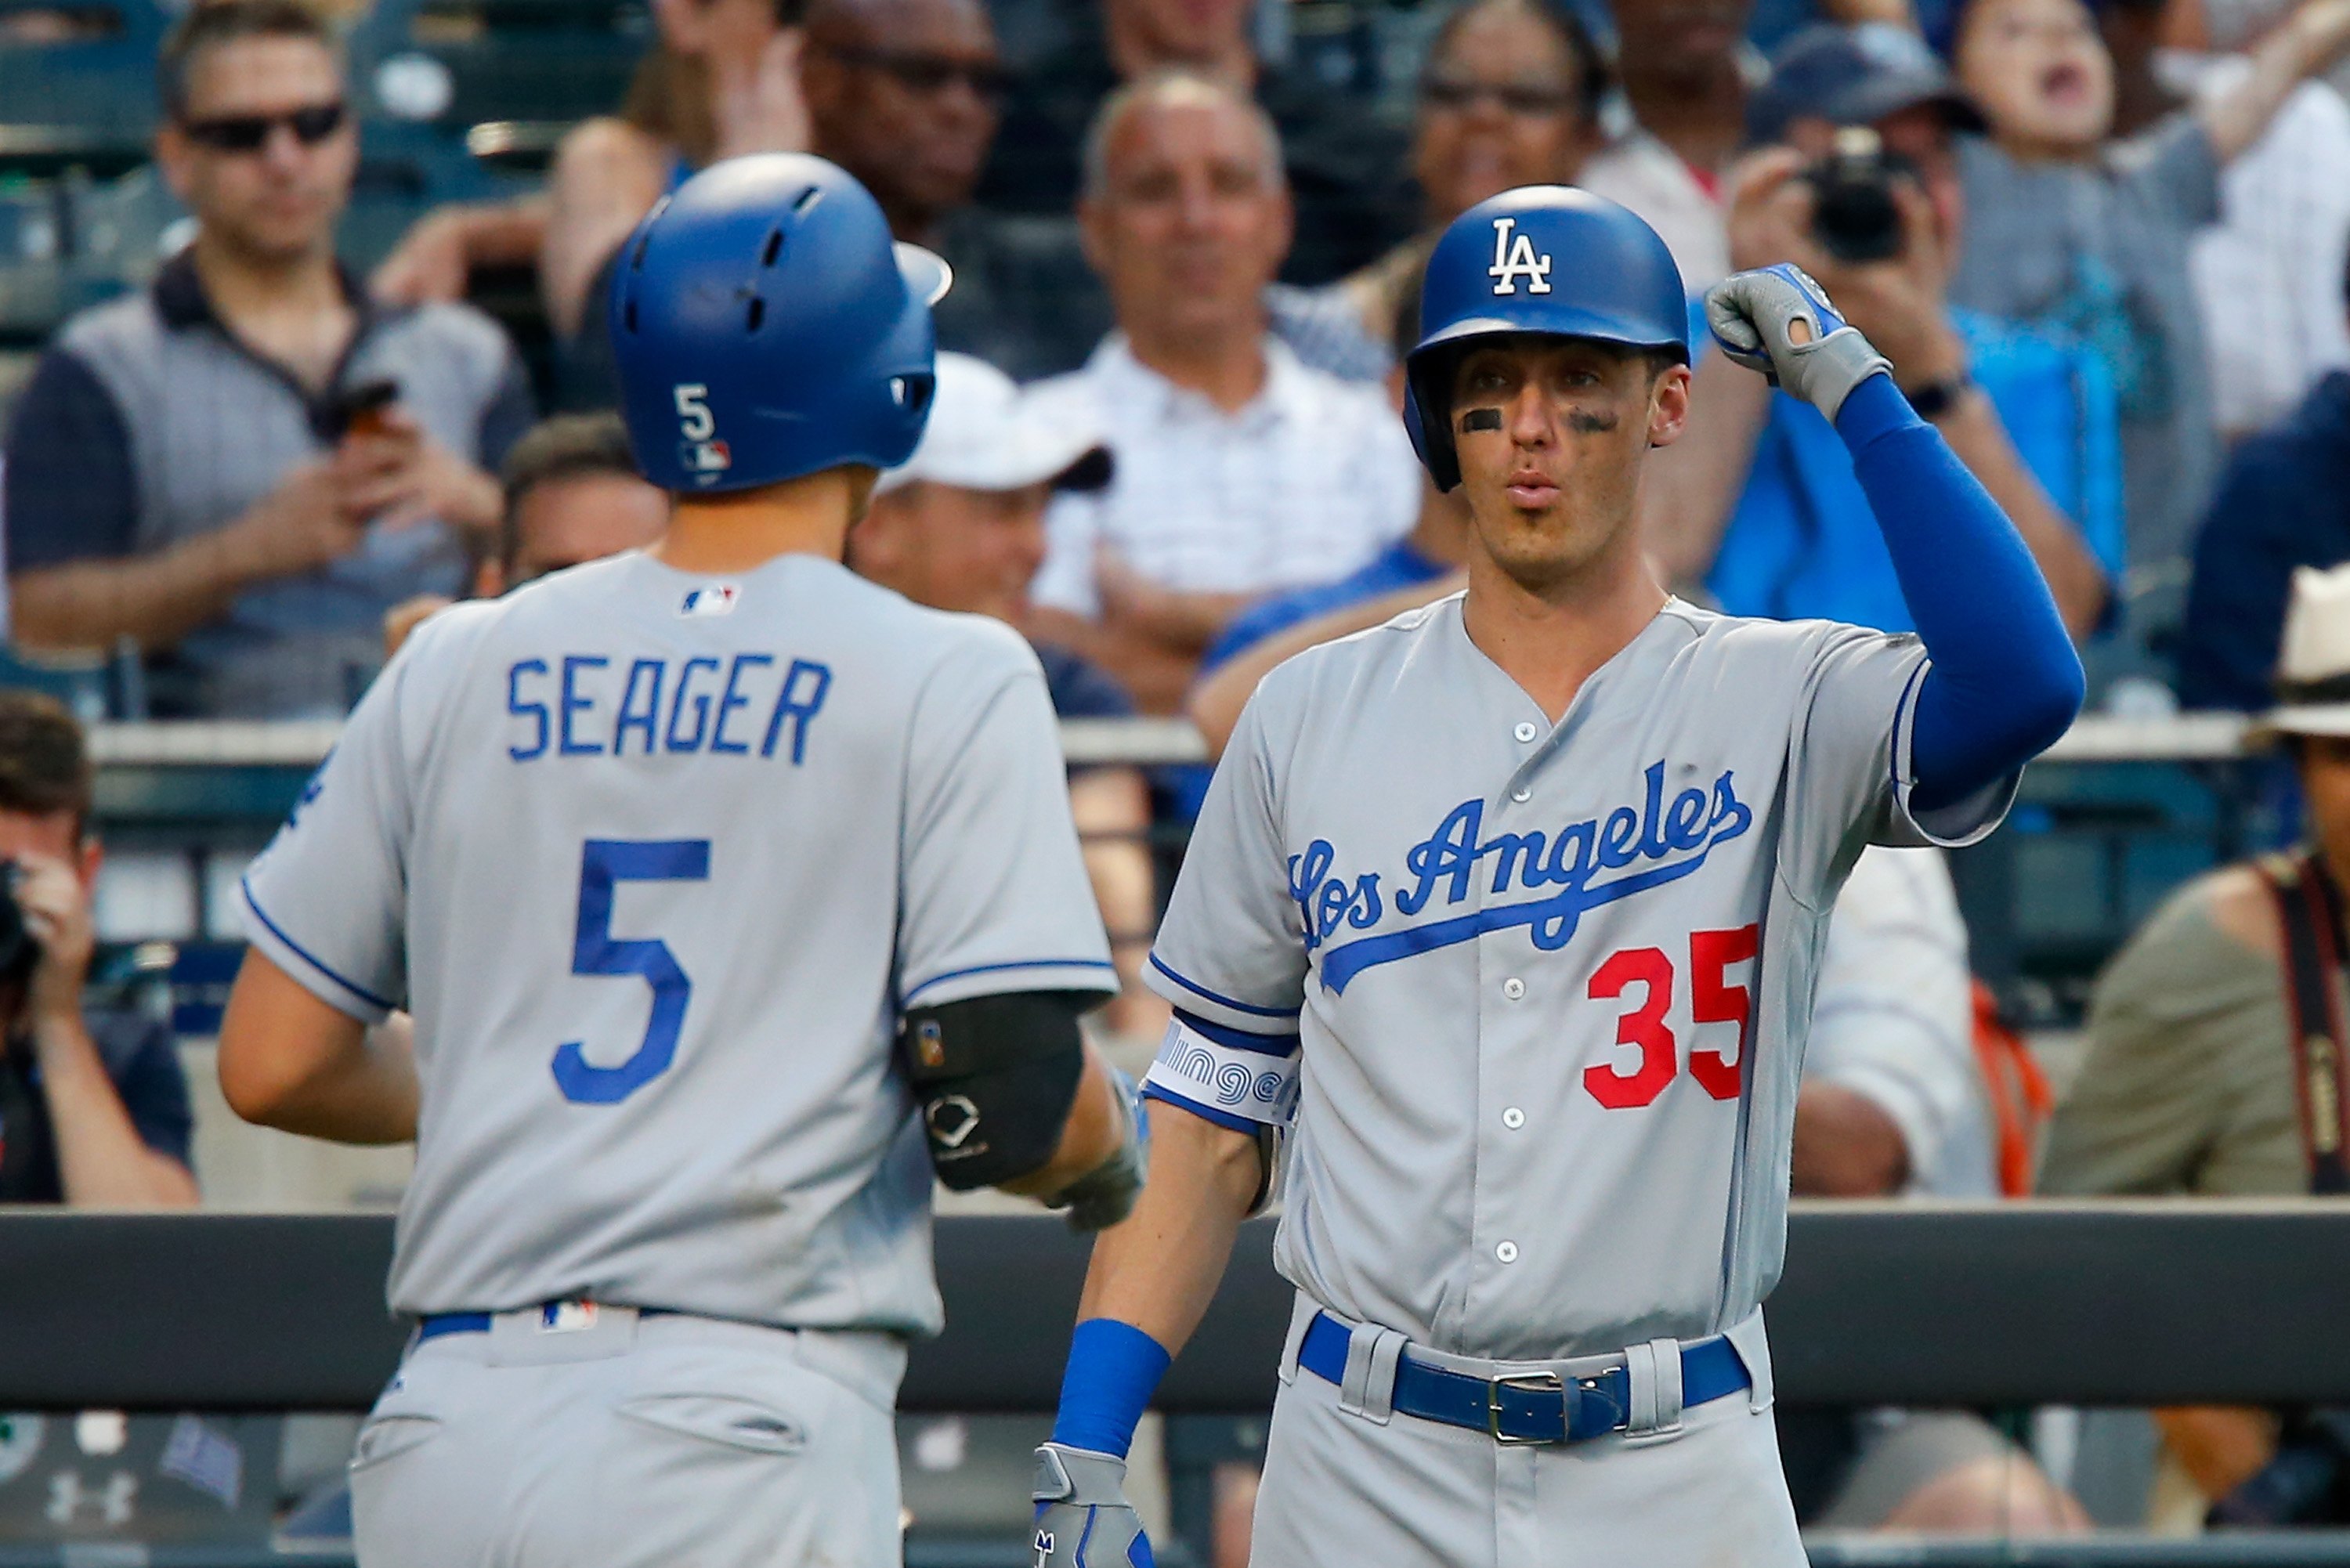 corey seager and cody bellinger wallpaper